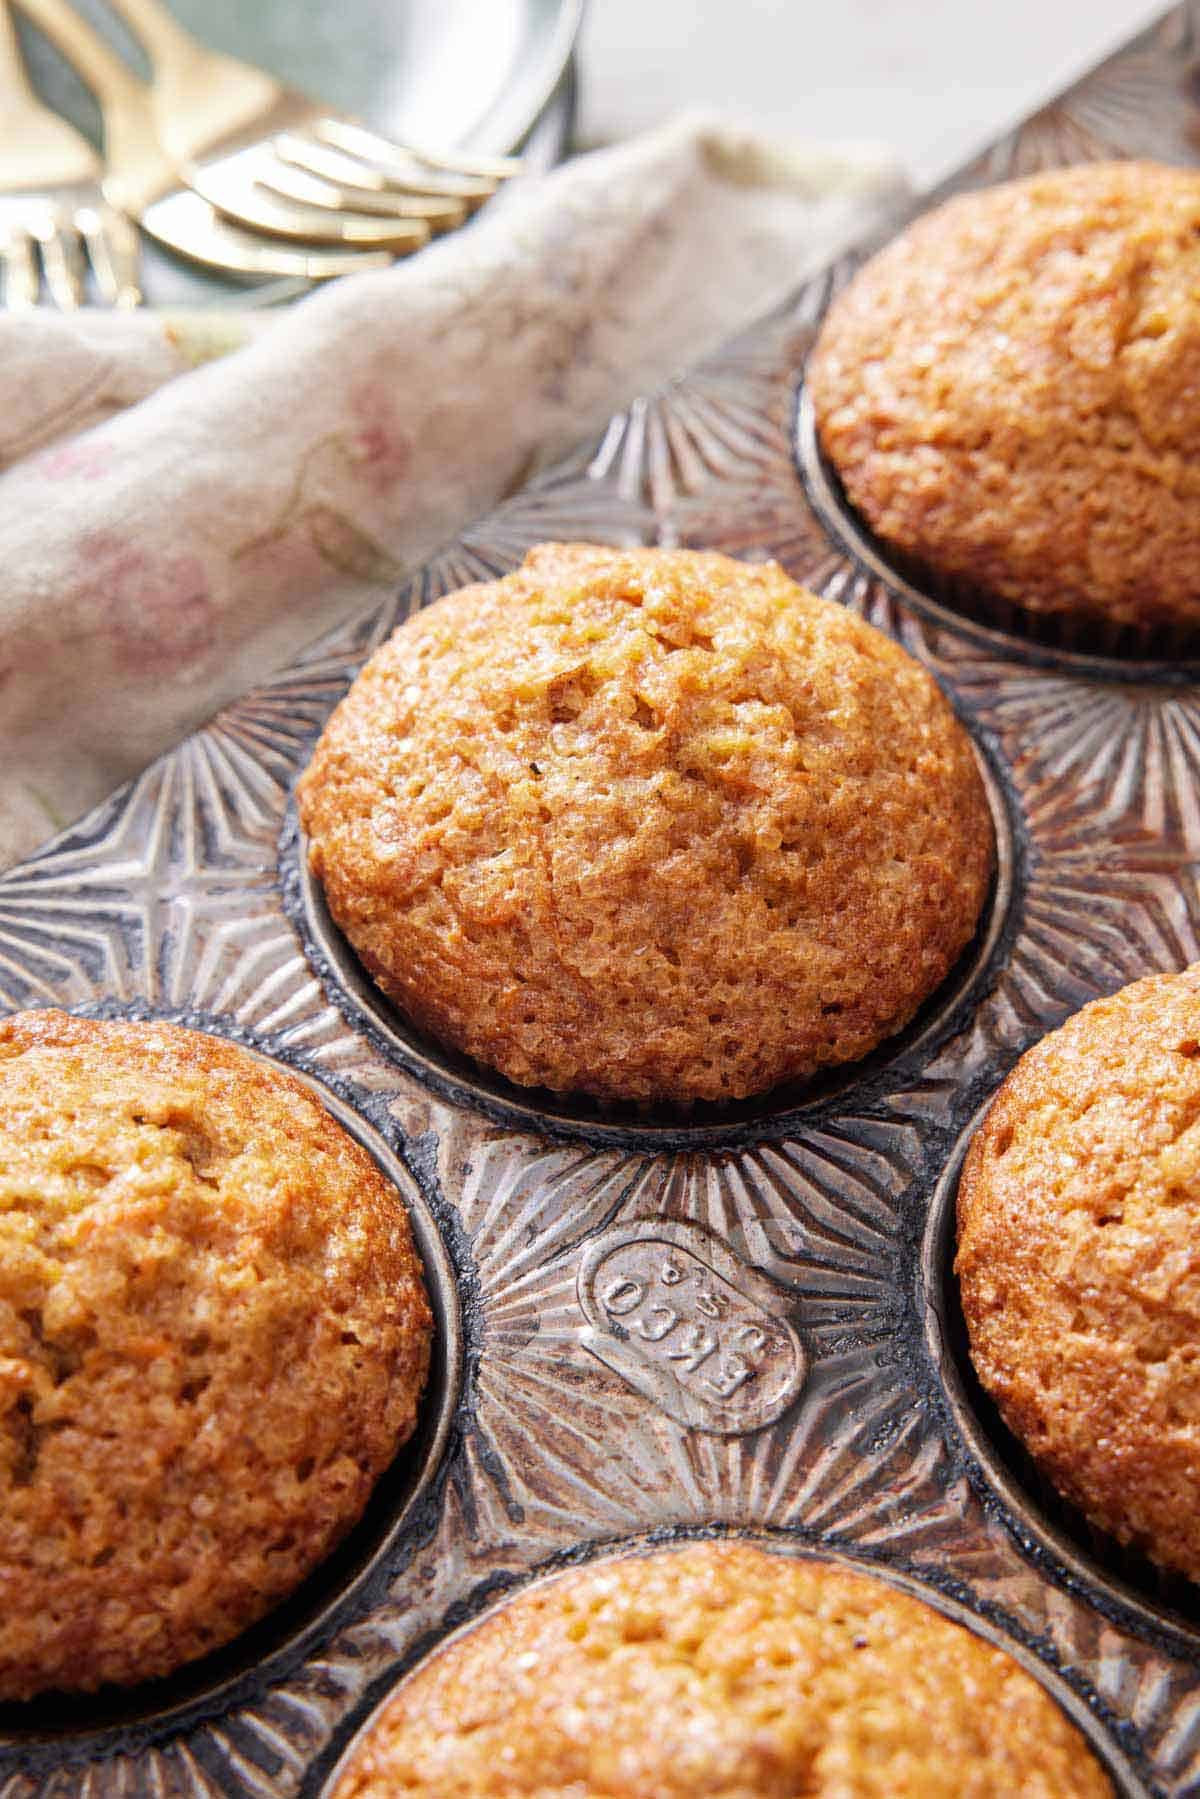 Carrot muffins in a muffin tin. Forks in the background.